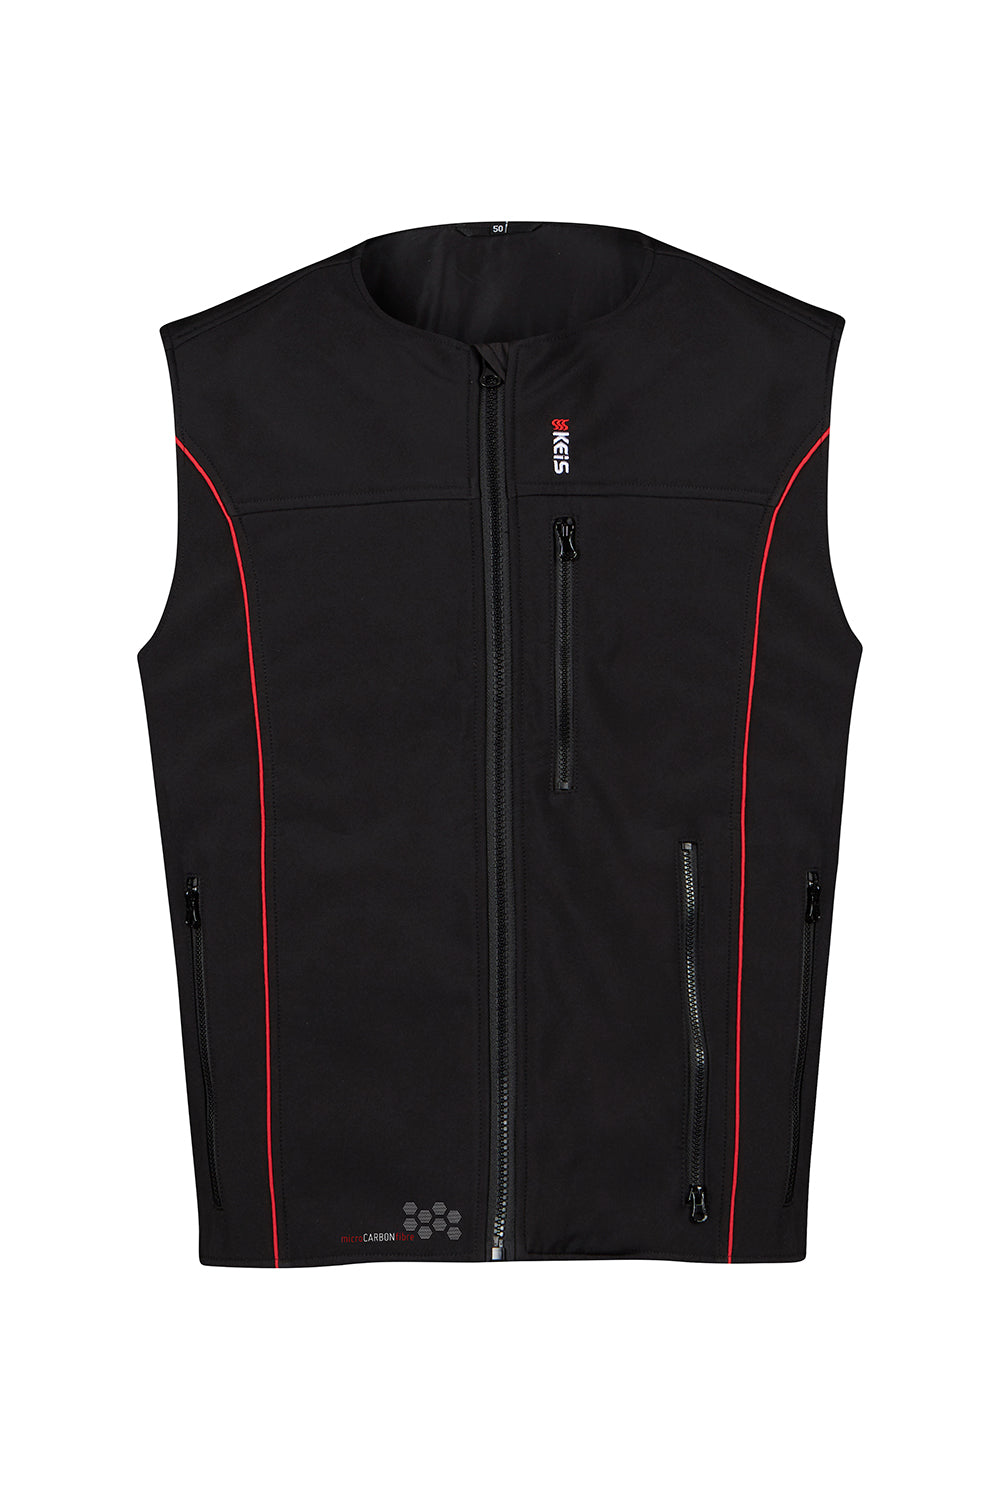 Keis heated vest baclk with red piping down front